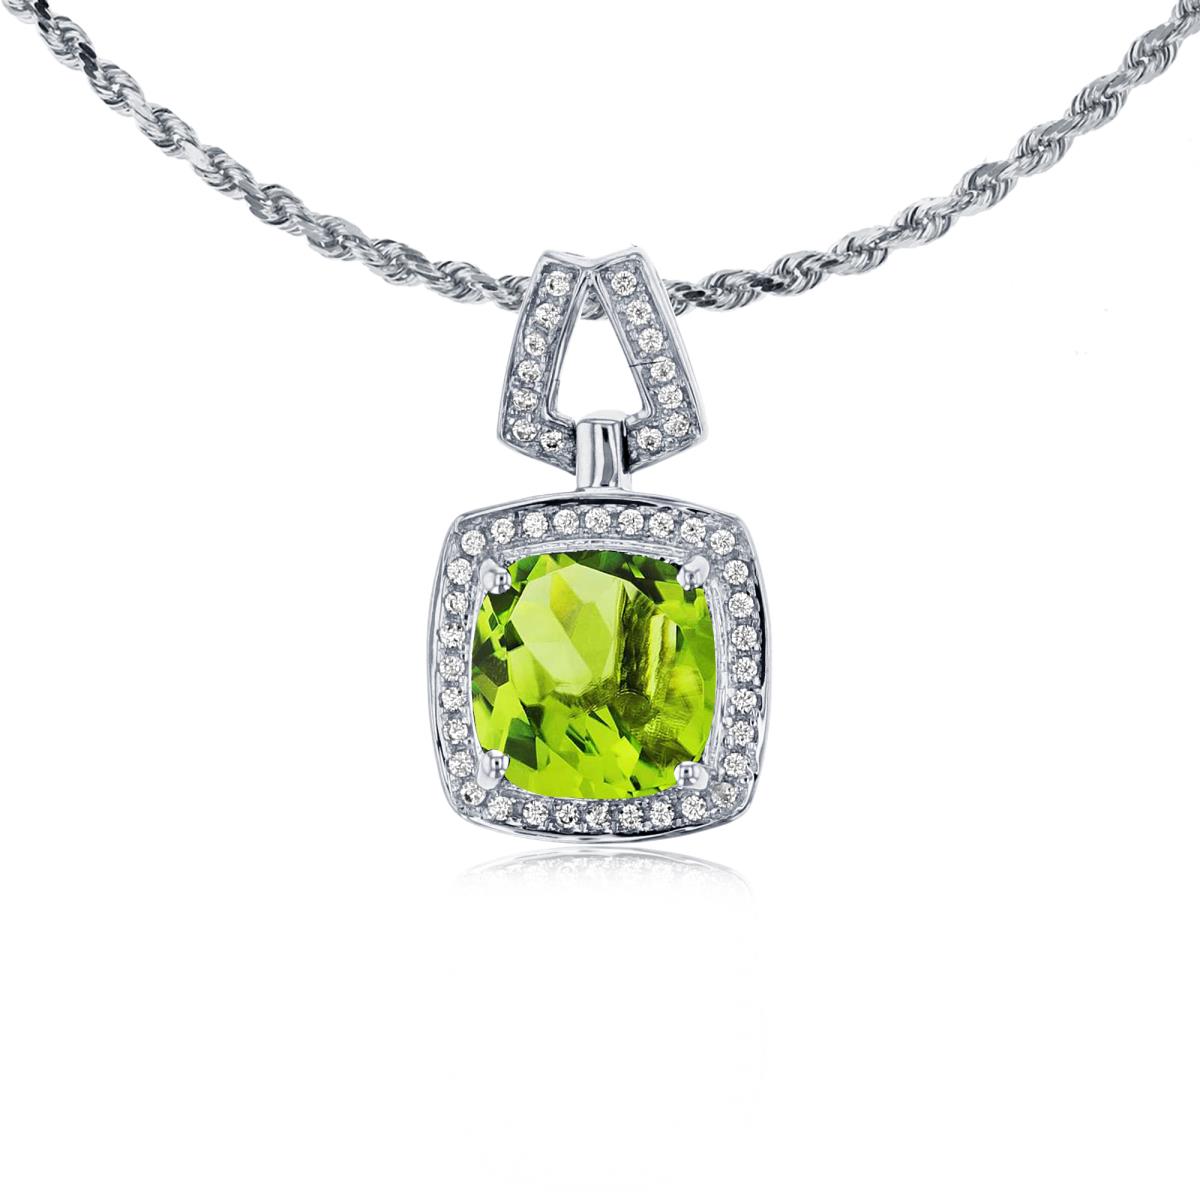 10K White Gold 7mm Cushion Peridot & 0.10 CTTW Diamond Halo 18" Rope Chain Necklace